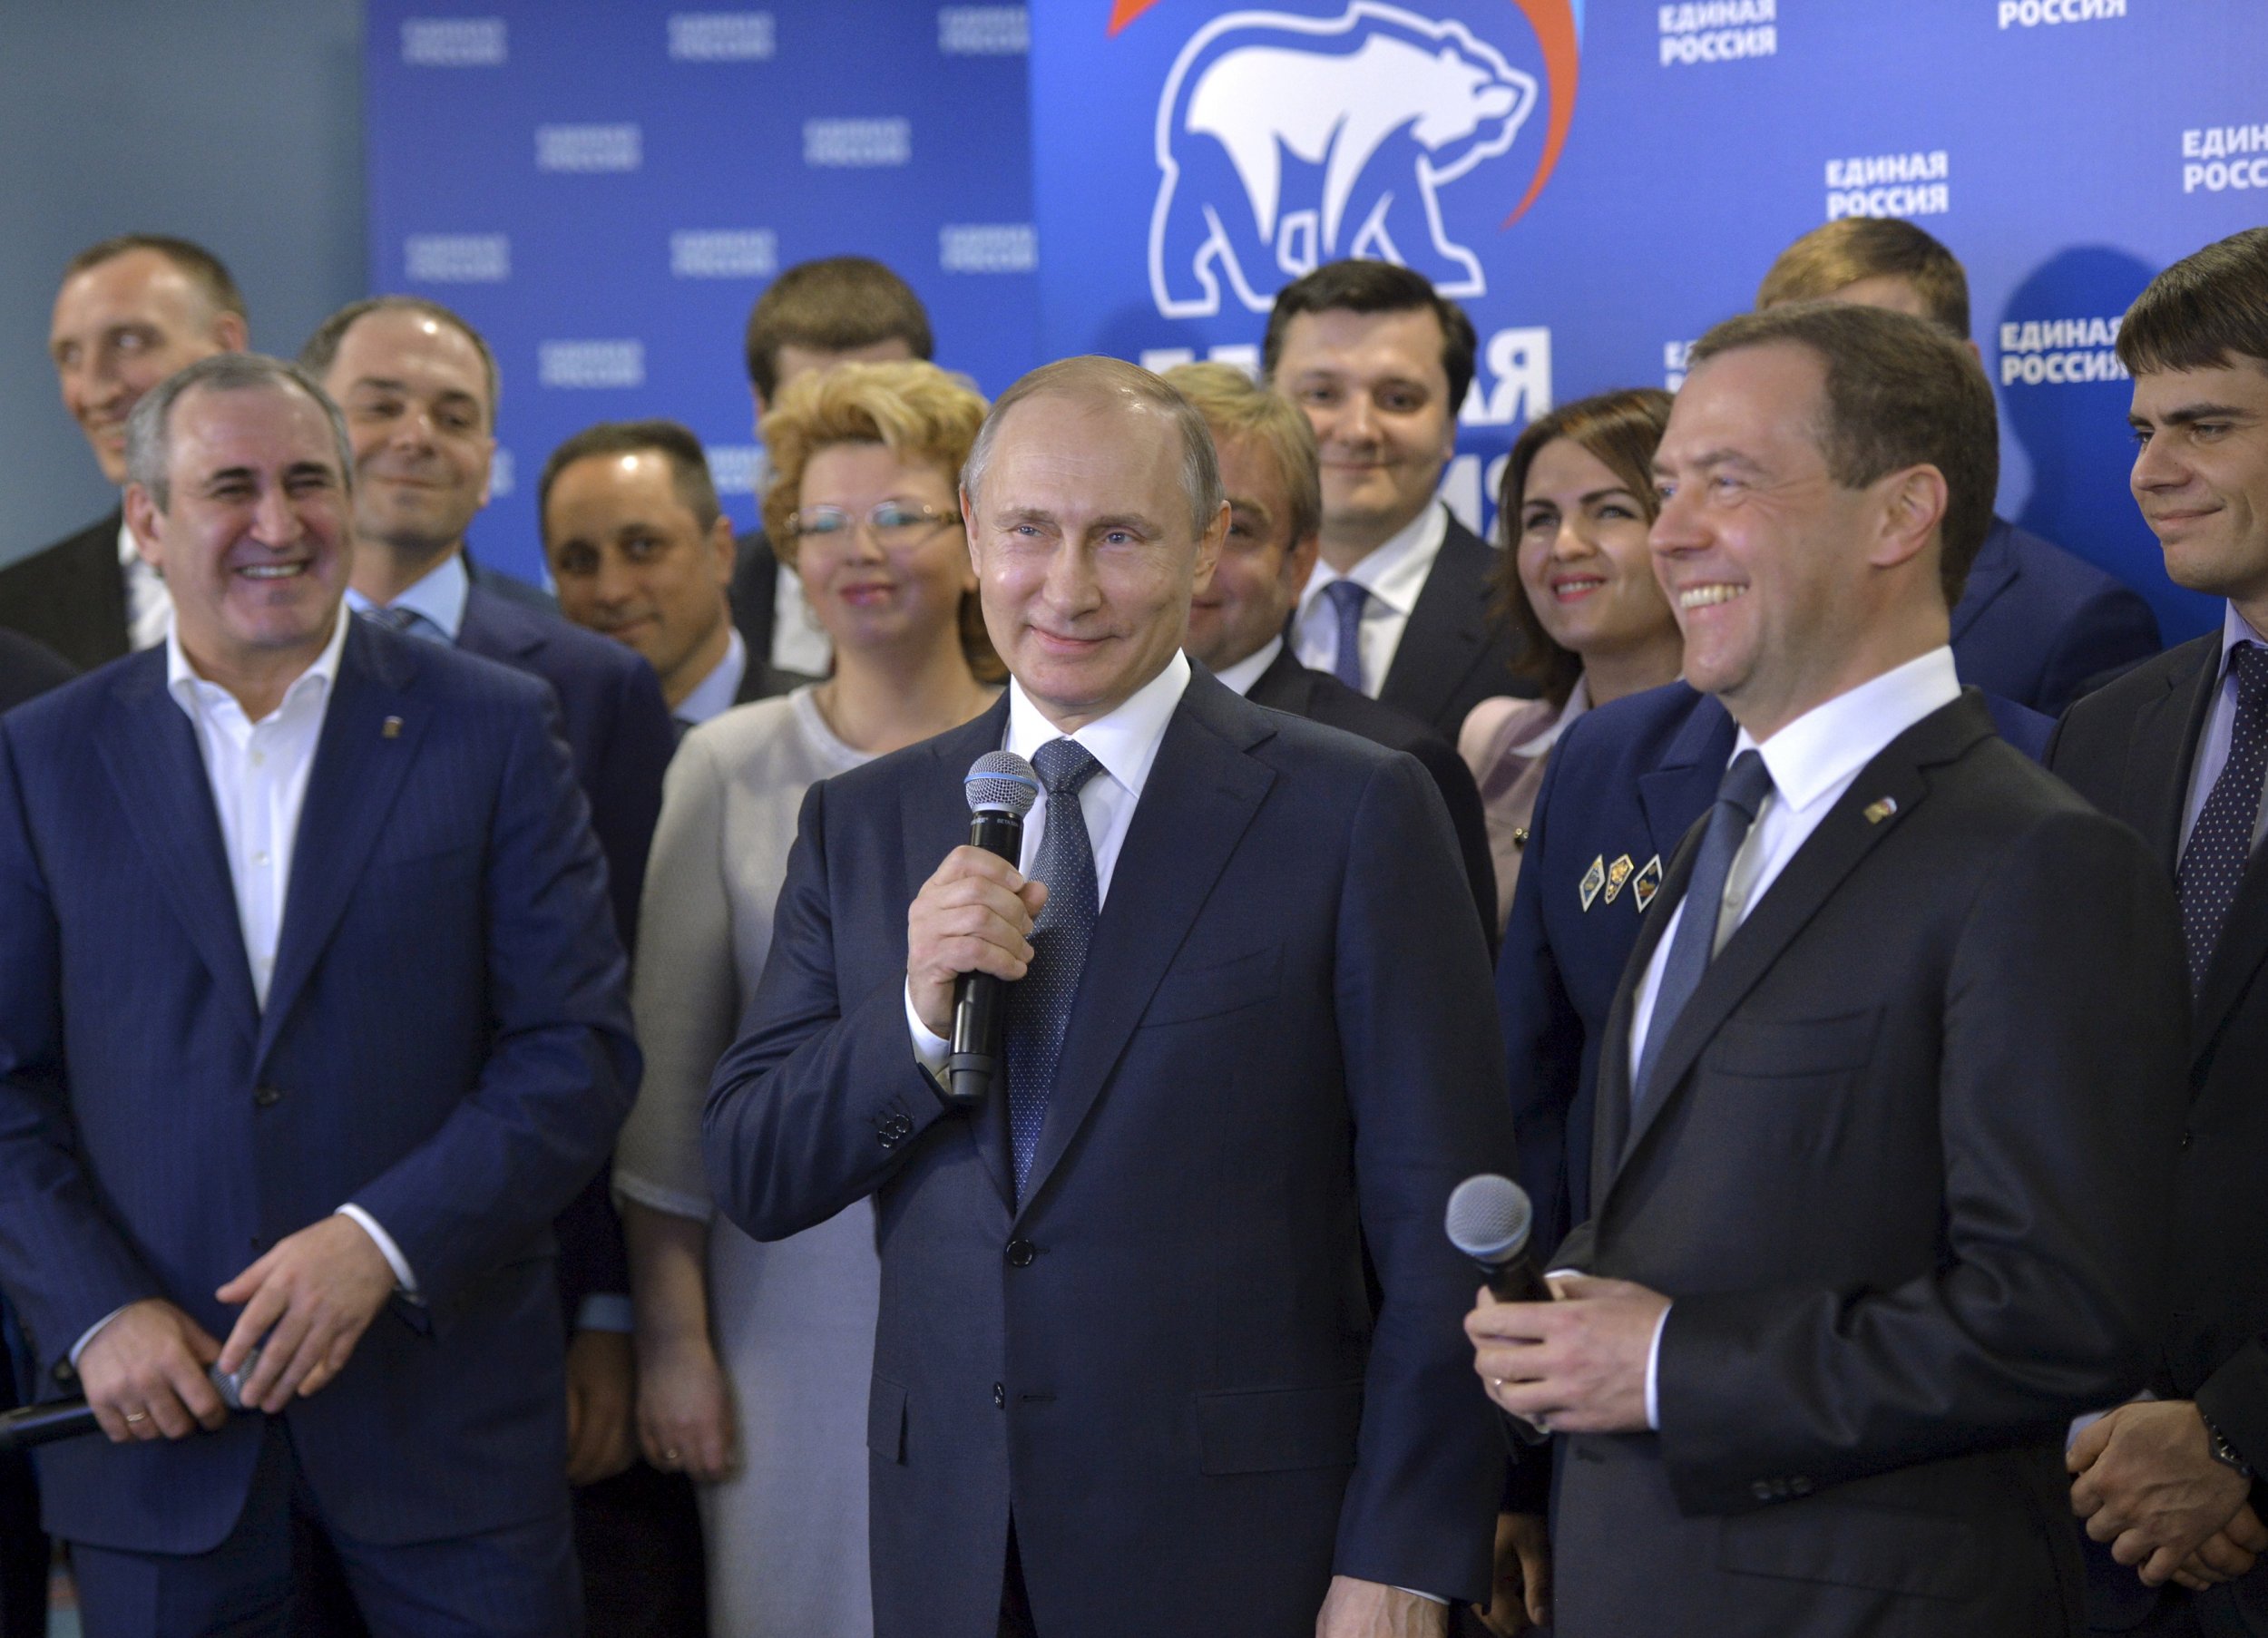 Putin, Medvedev and United Russia